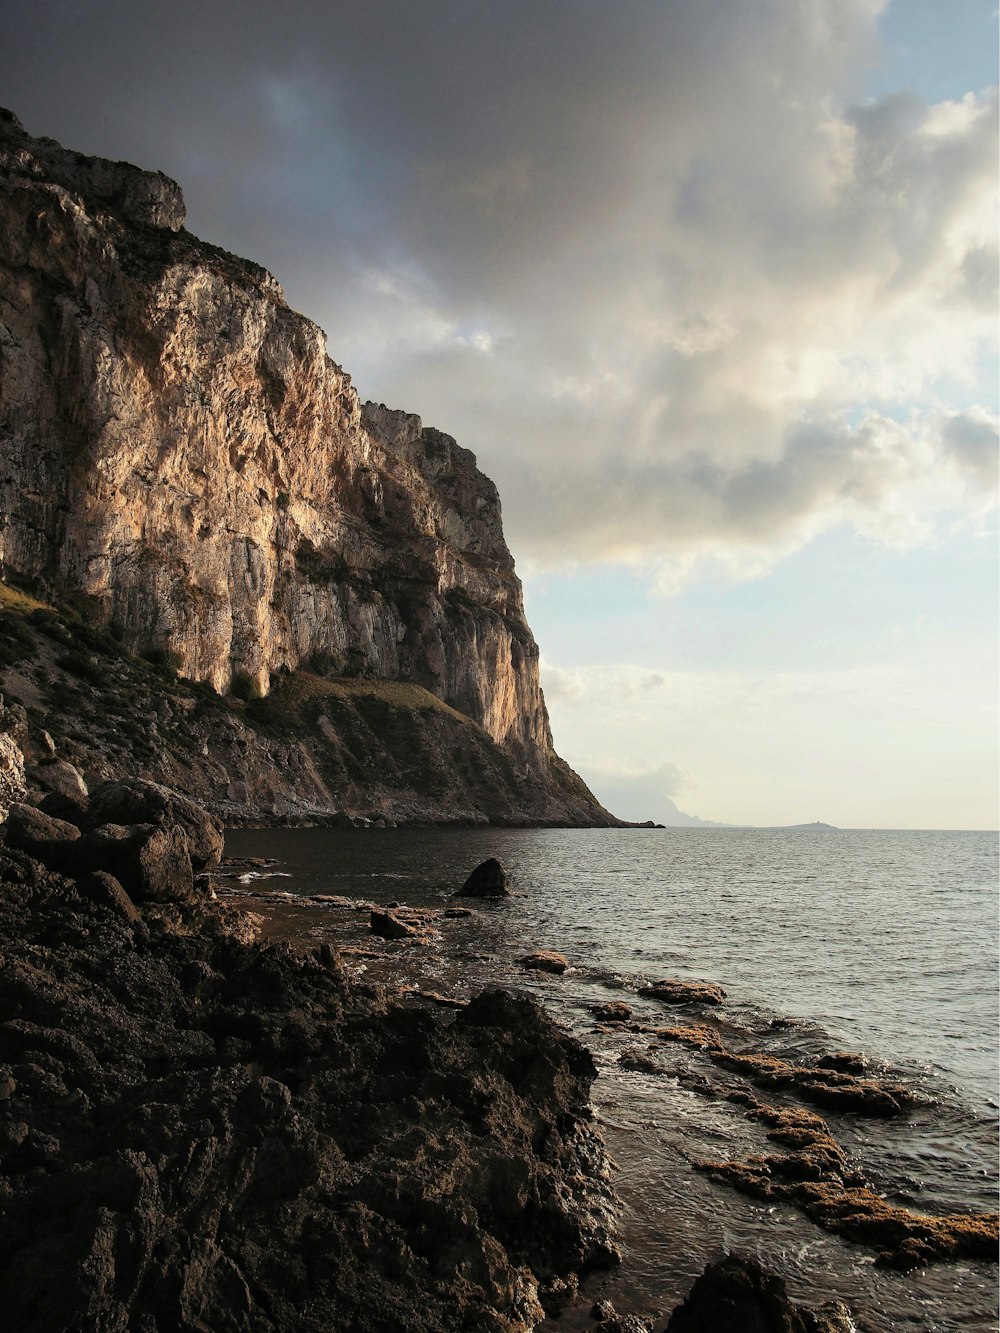 a rocky beach with a large cliff in the background